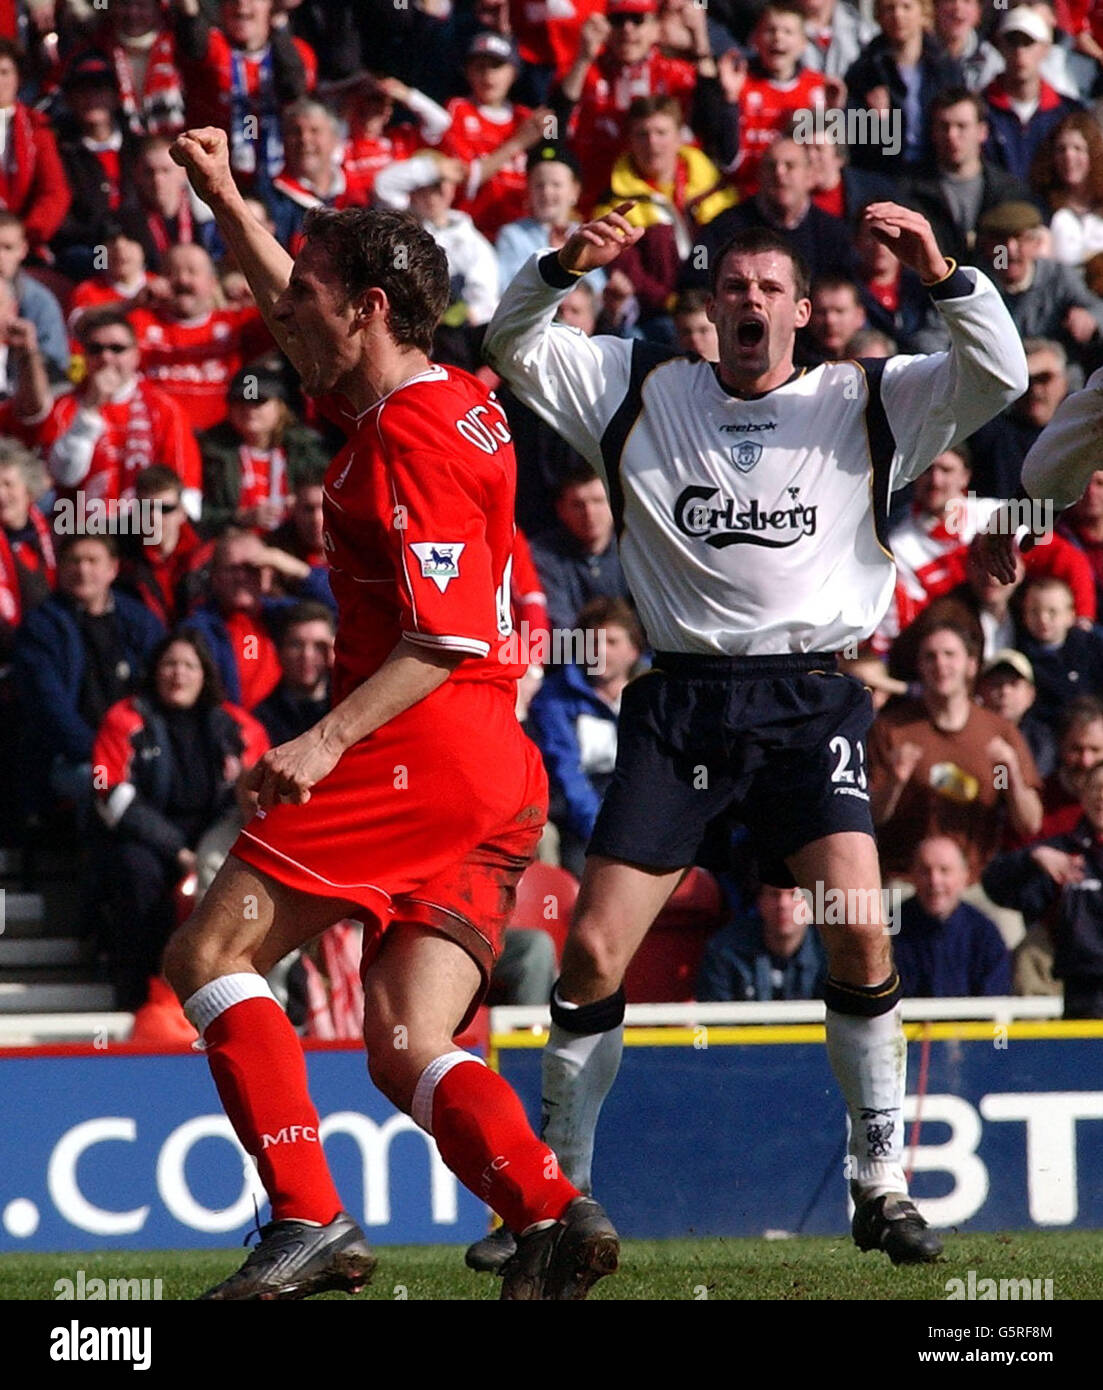 Middlesbrough's Gareth Southgate celebrates his teams goal against Liverpool during their FA Barclaycard Premiership match at Middlesbrough's Cellnet Riverside Stadium. * Stock Photo